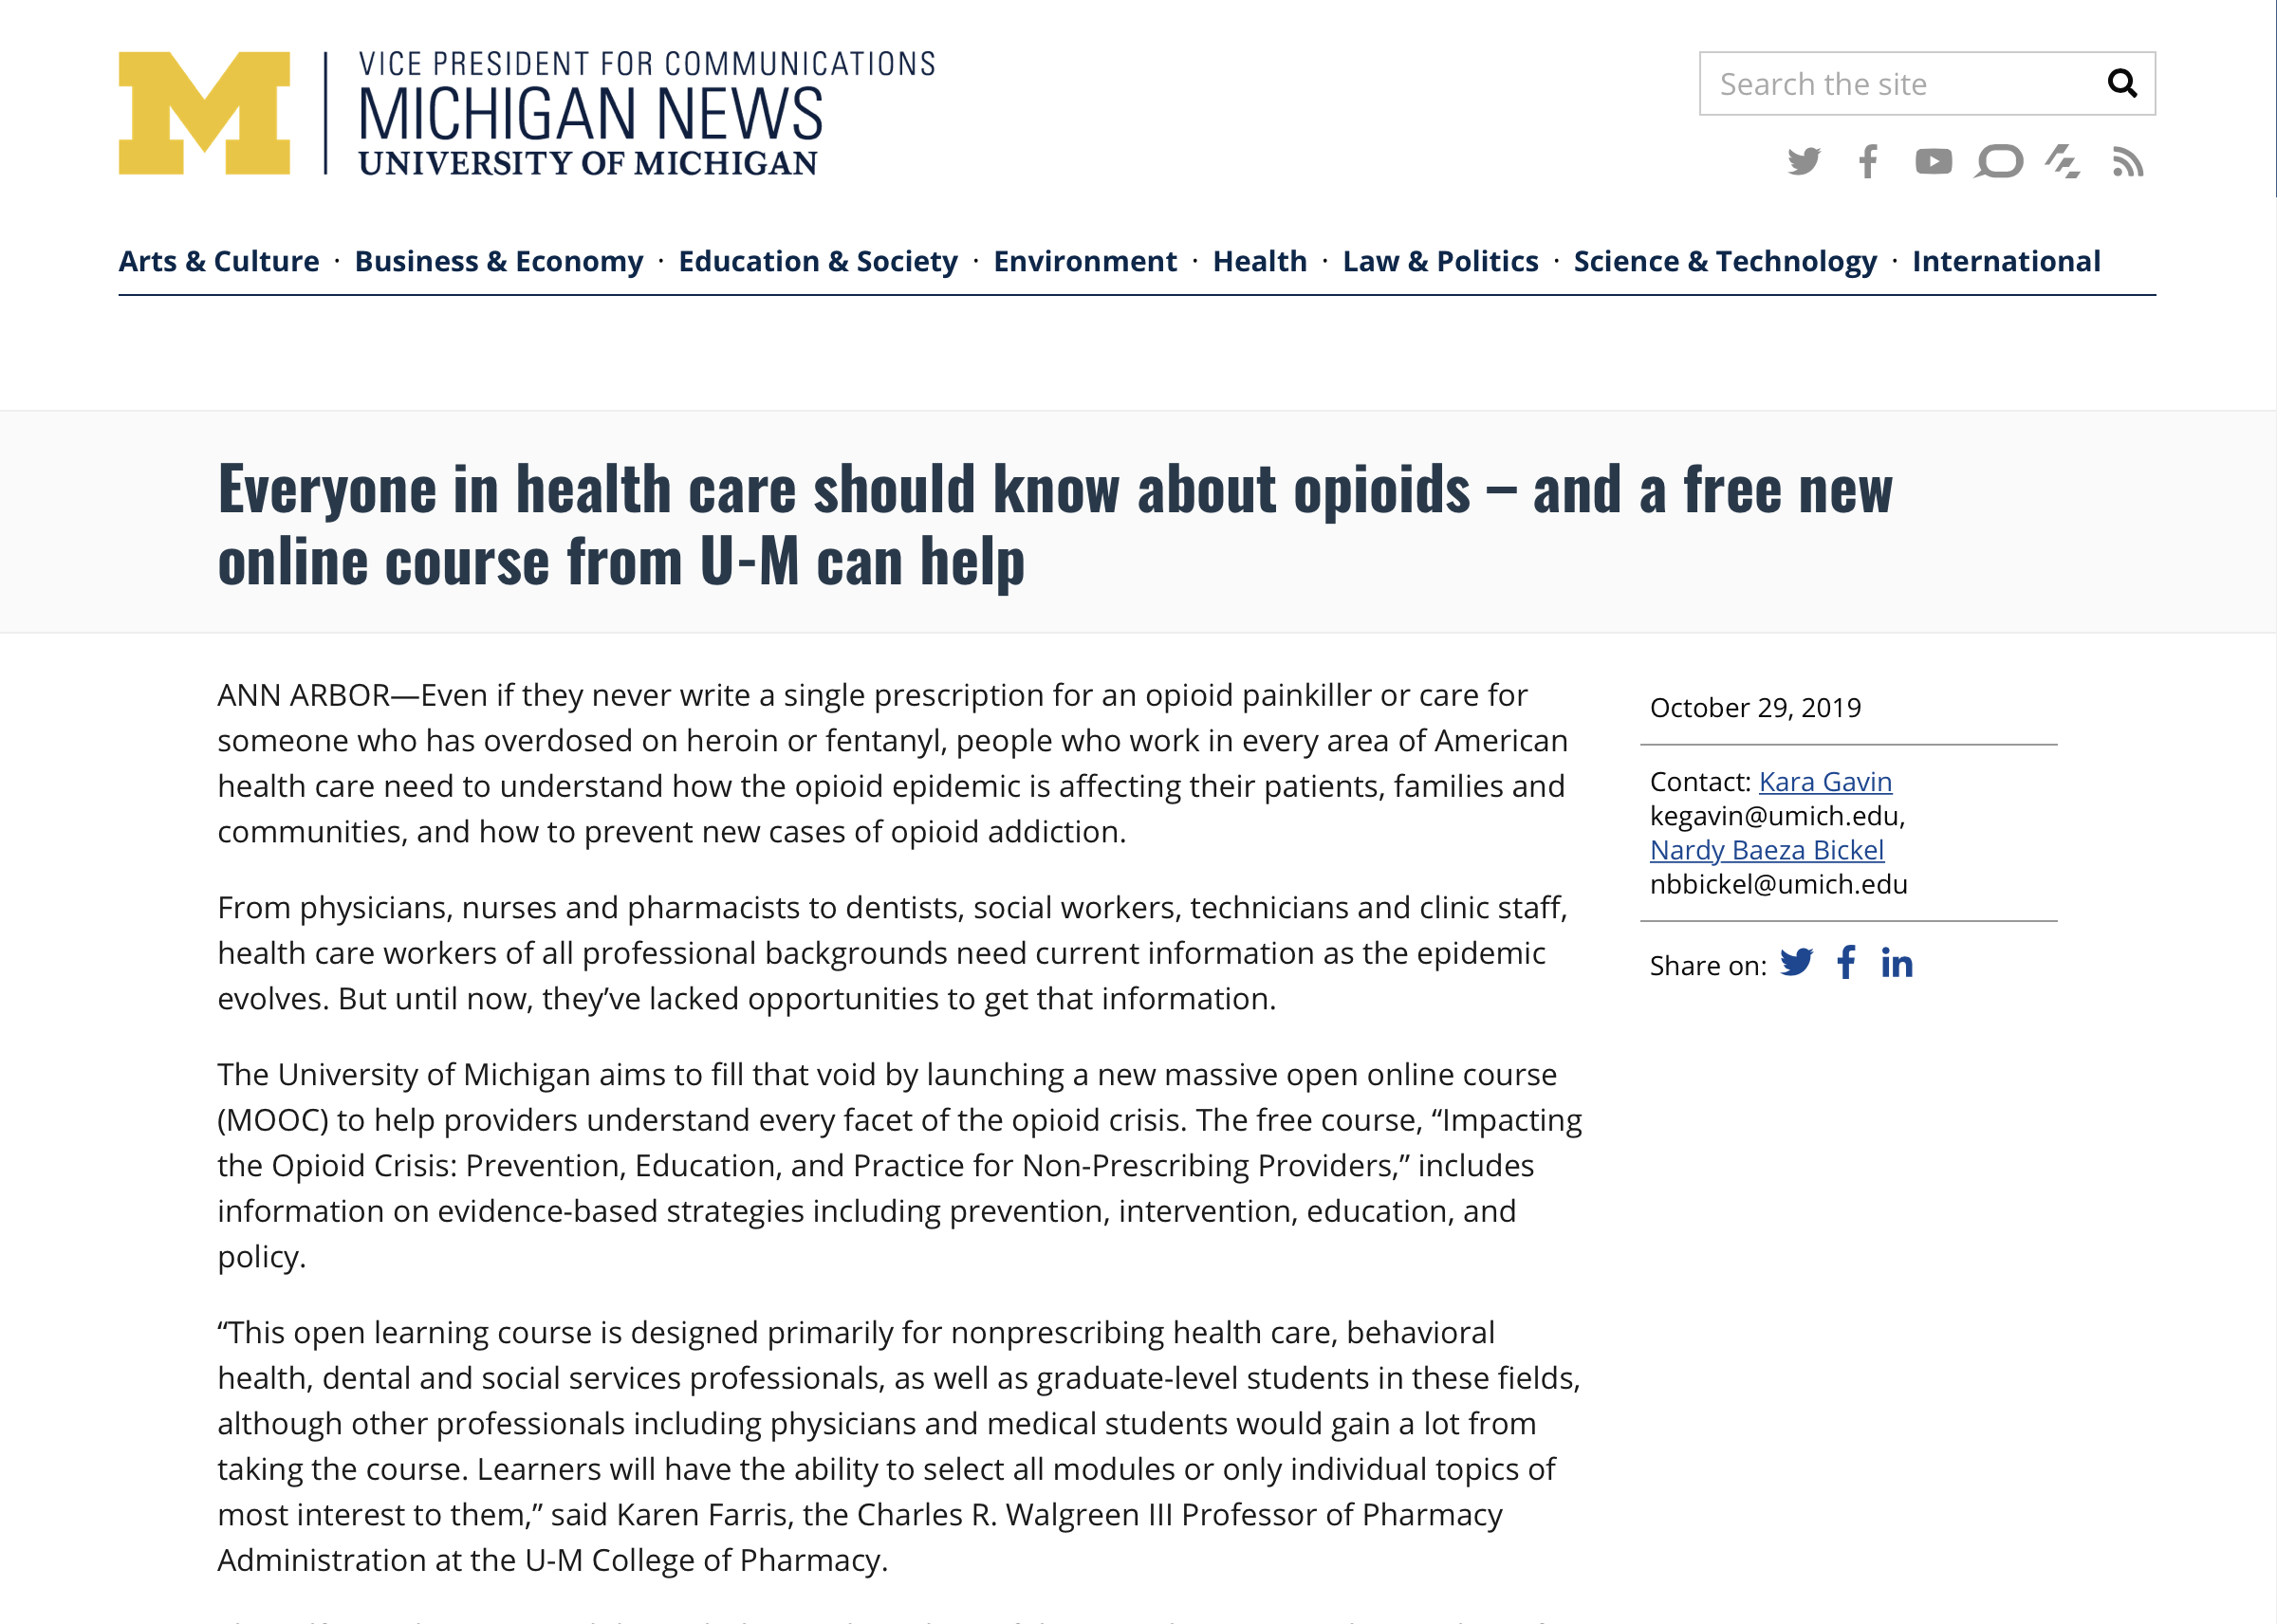 Everyone in health care should know about opioids – and a free new online course from U-M can help